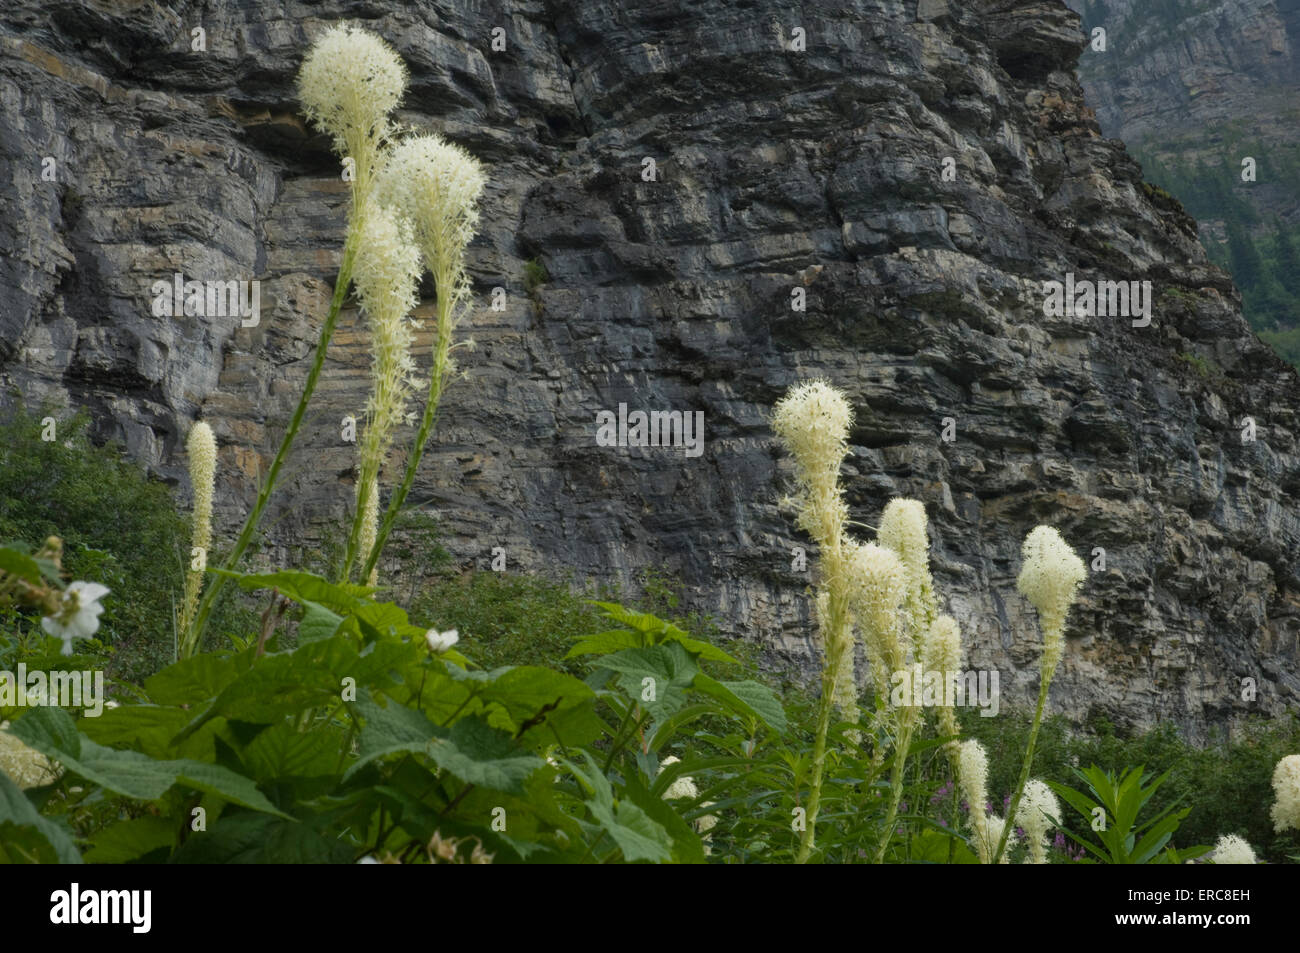 BEAR GRASS BY GOING-TO-THE-SUN-ROAD GLACIER NATIONAL PARK MONTANA USA Stock Photo